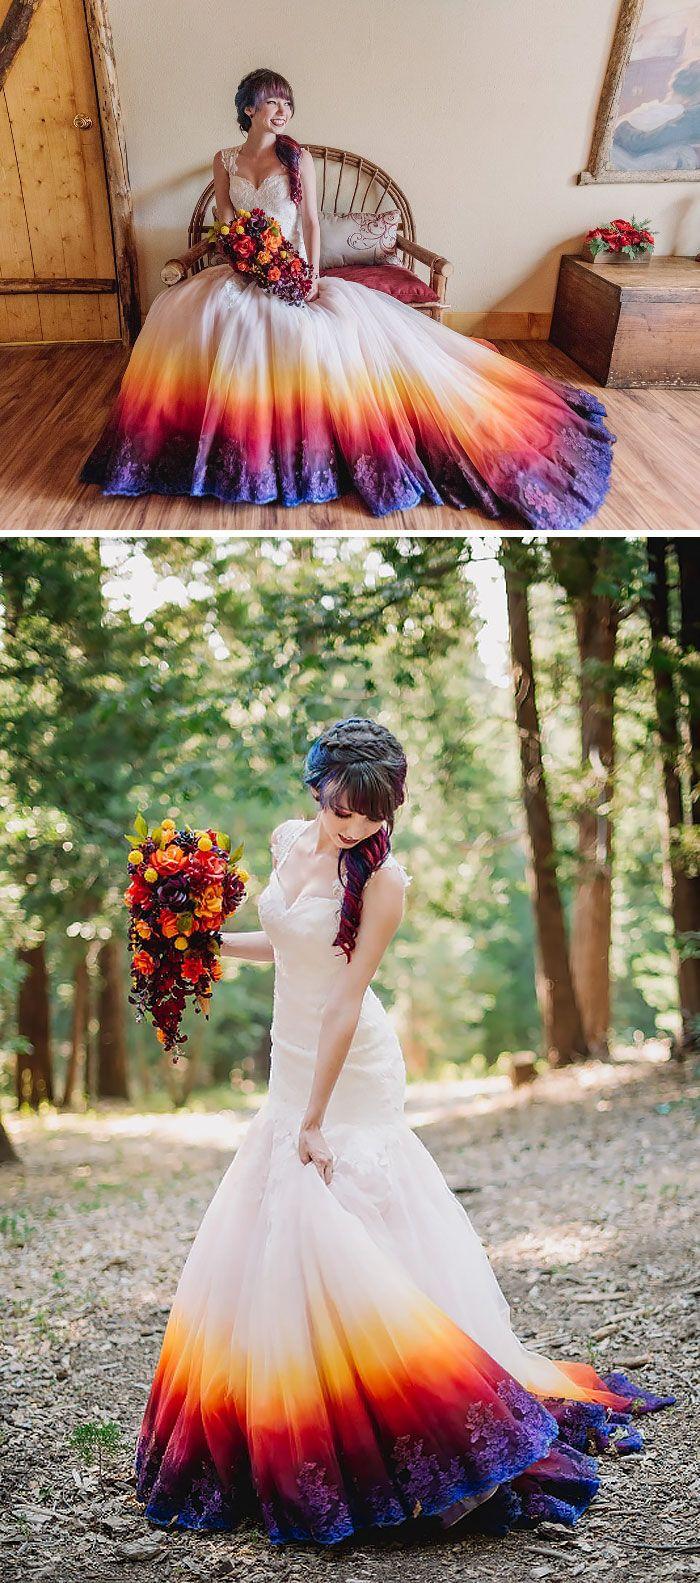 Hochzeit - Dip Dye Wedding Dress Trend Will Make Your Big Day More Colorful